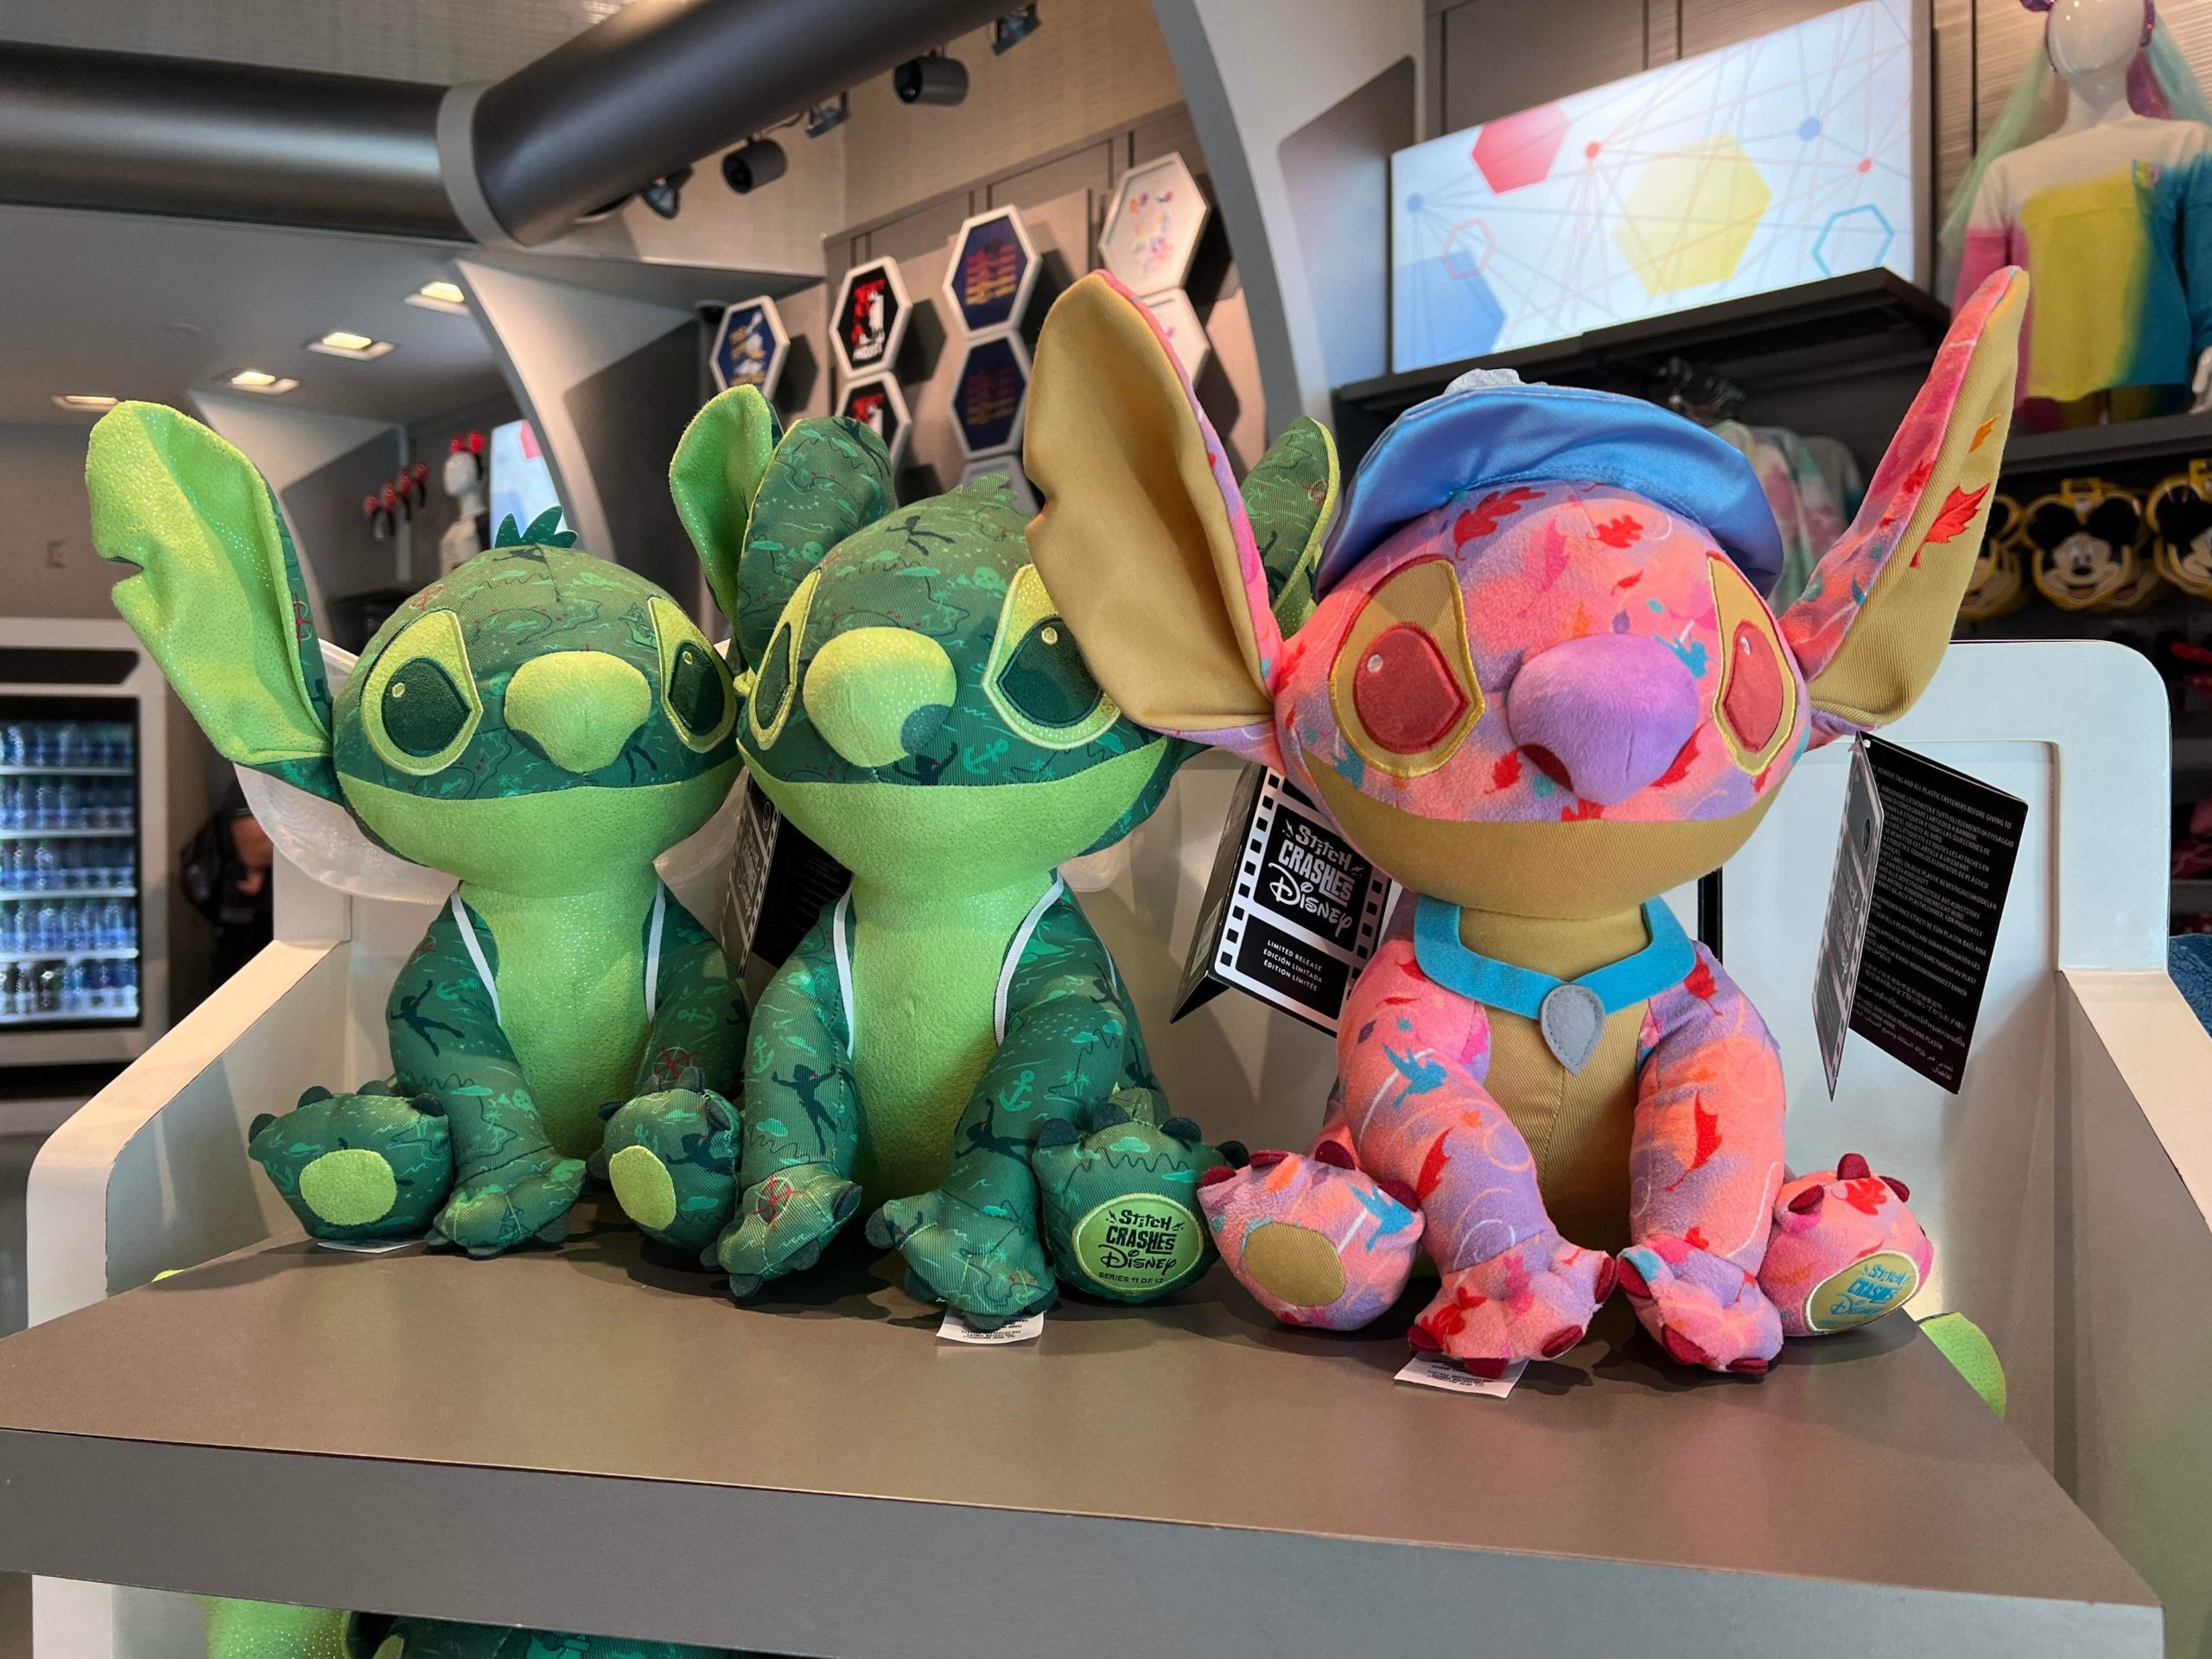 Colorful Stitch Crashes Disney Plush lands in Star Traders! 